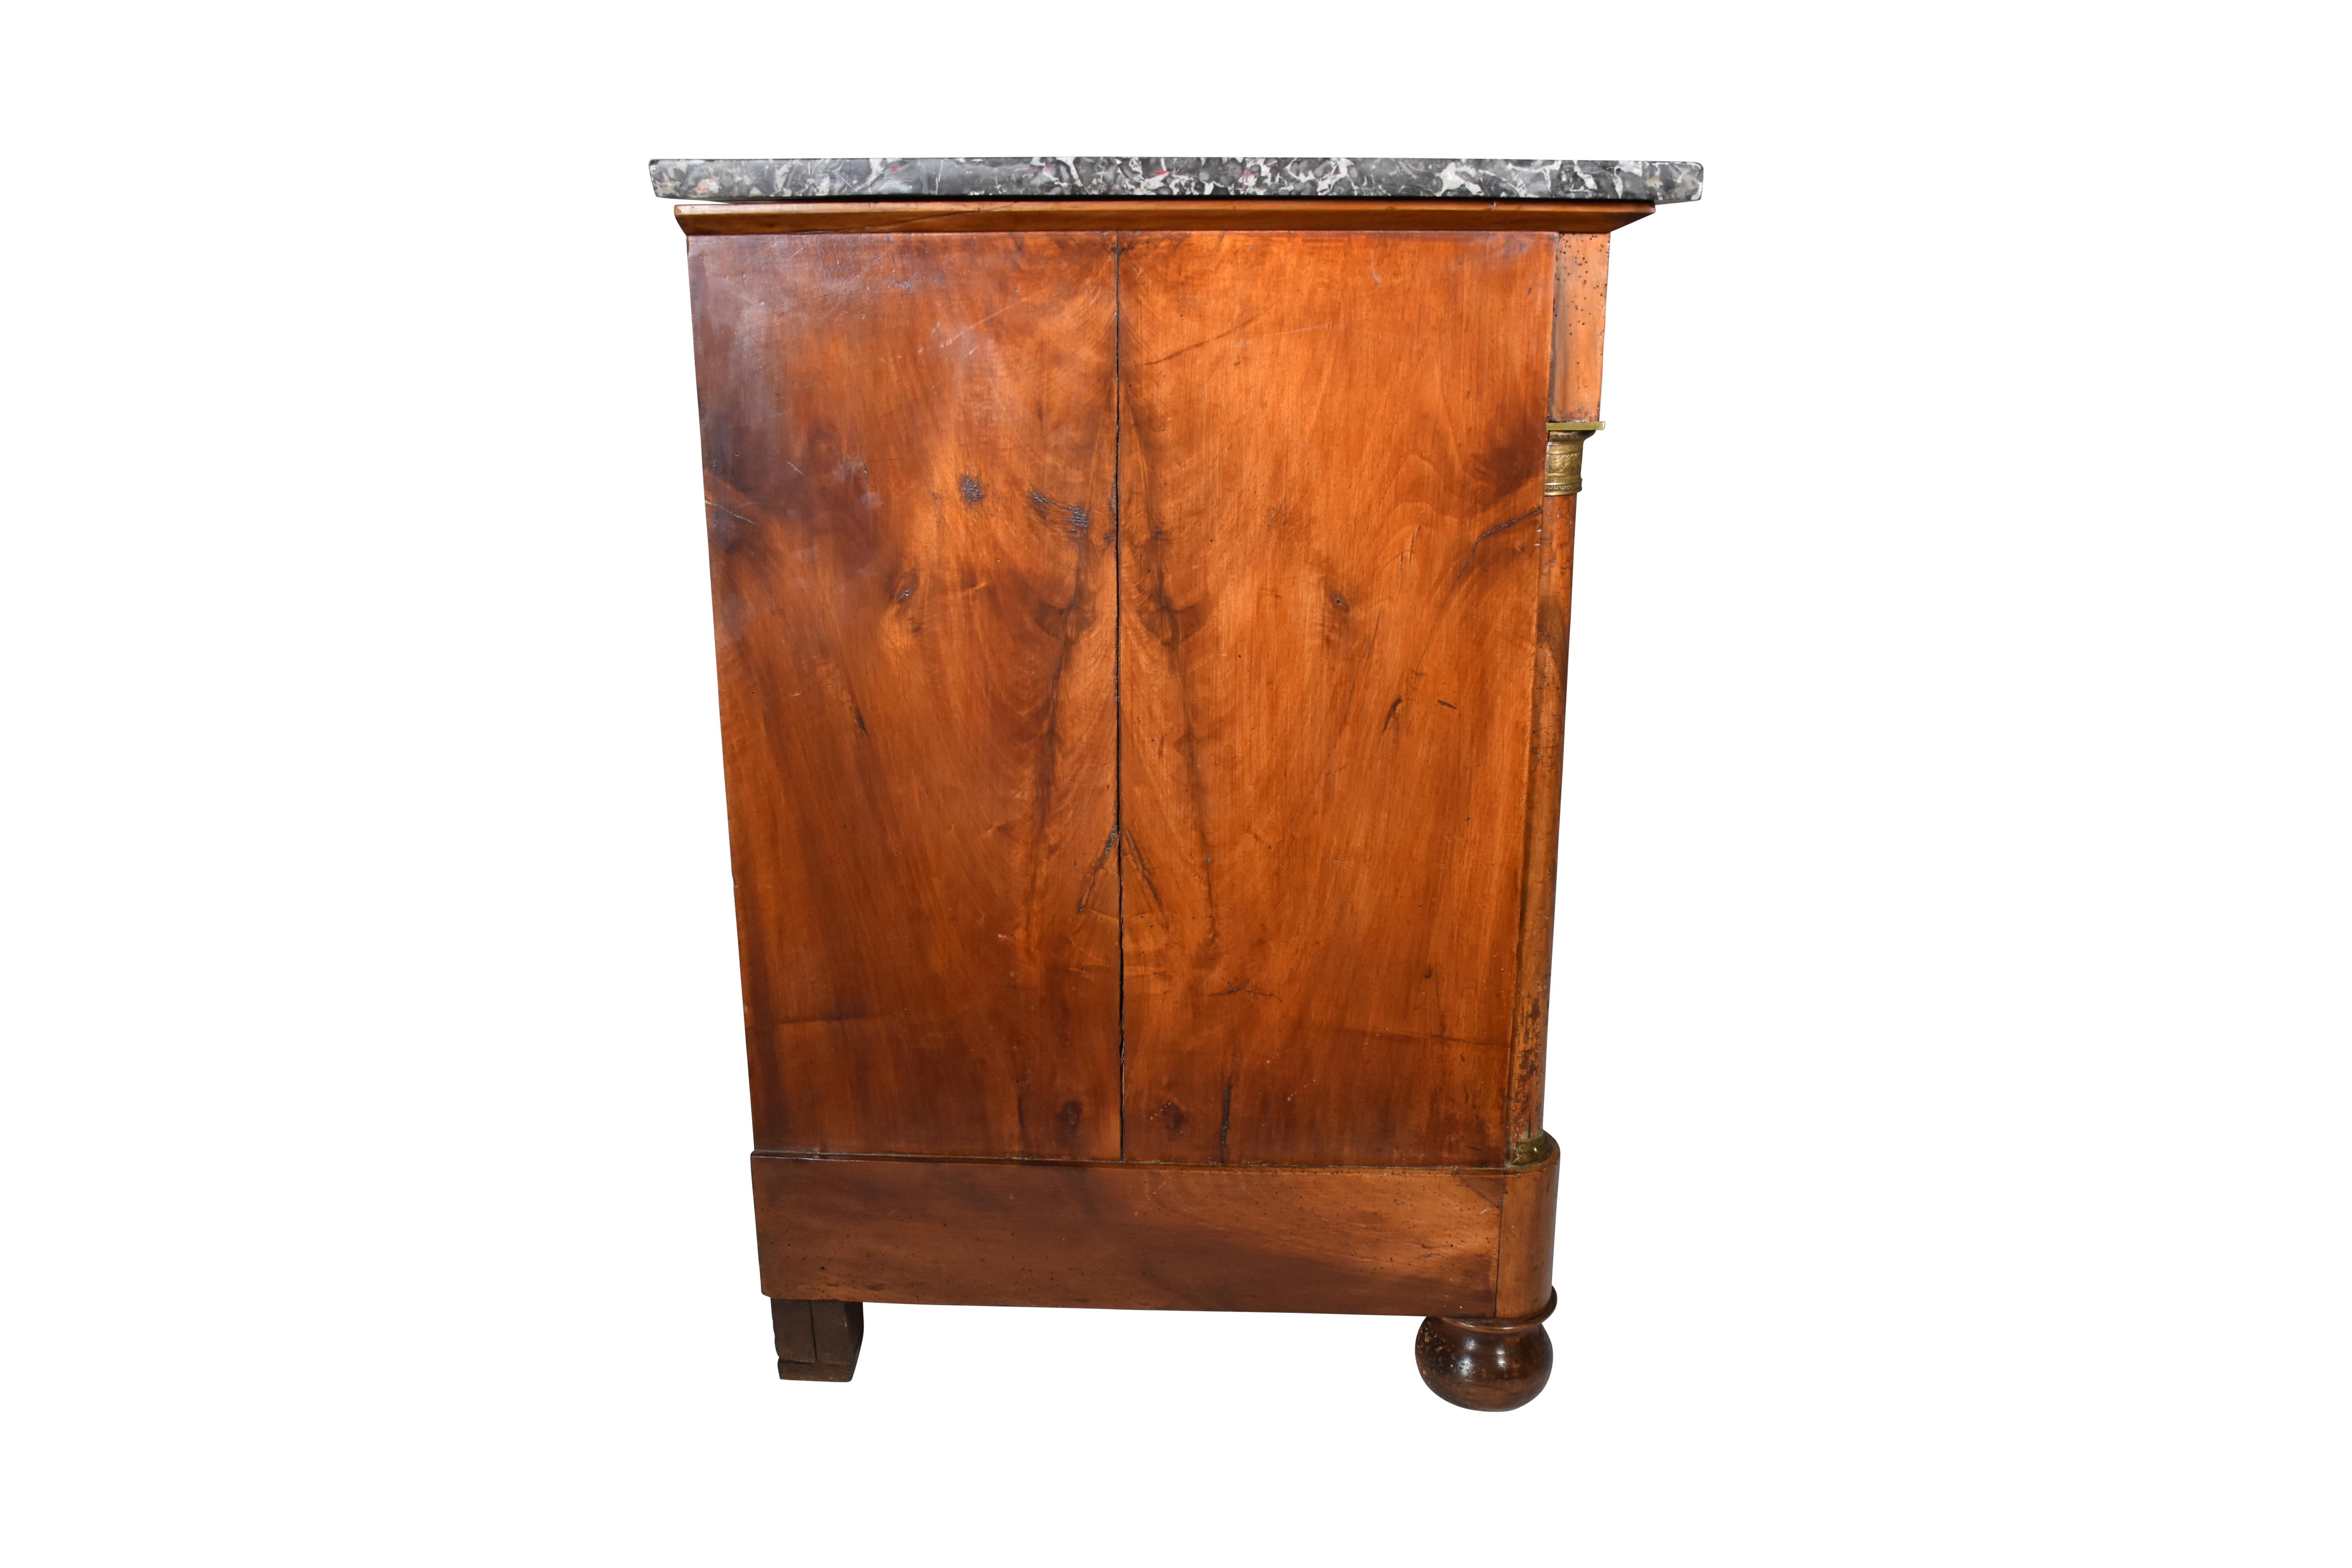 Beautifully bookmarked wood grain sets off each of the three doors of this wonderful French enfilade or buffet that is made of Walnut with a Marble Top. Wood grain details continue on the single drawer accented by brass handles. Ormalou brass